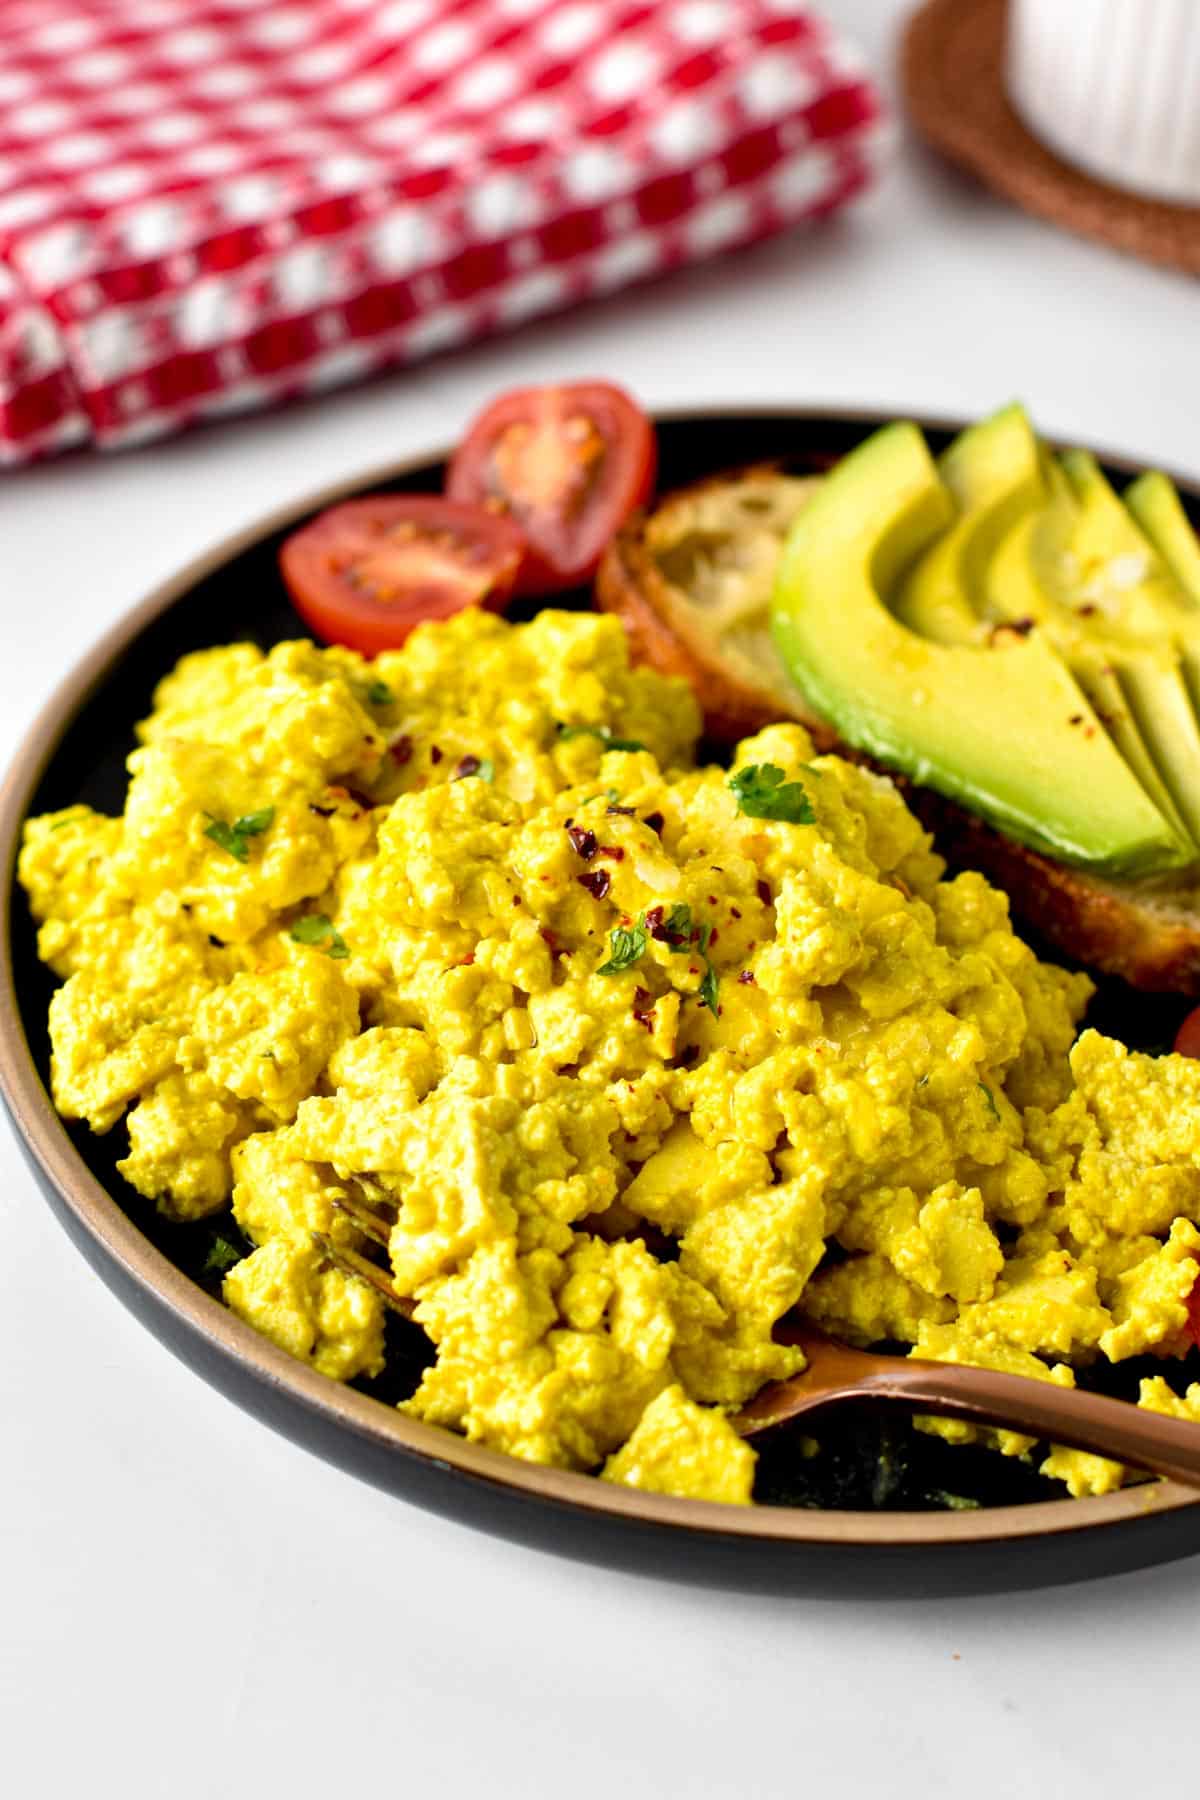 This Tofu Scramble recipe is an egg-free scramble made out tofu with such a delicious cheesy, eggy flavor that nobody will guess it's eggless.